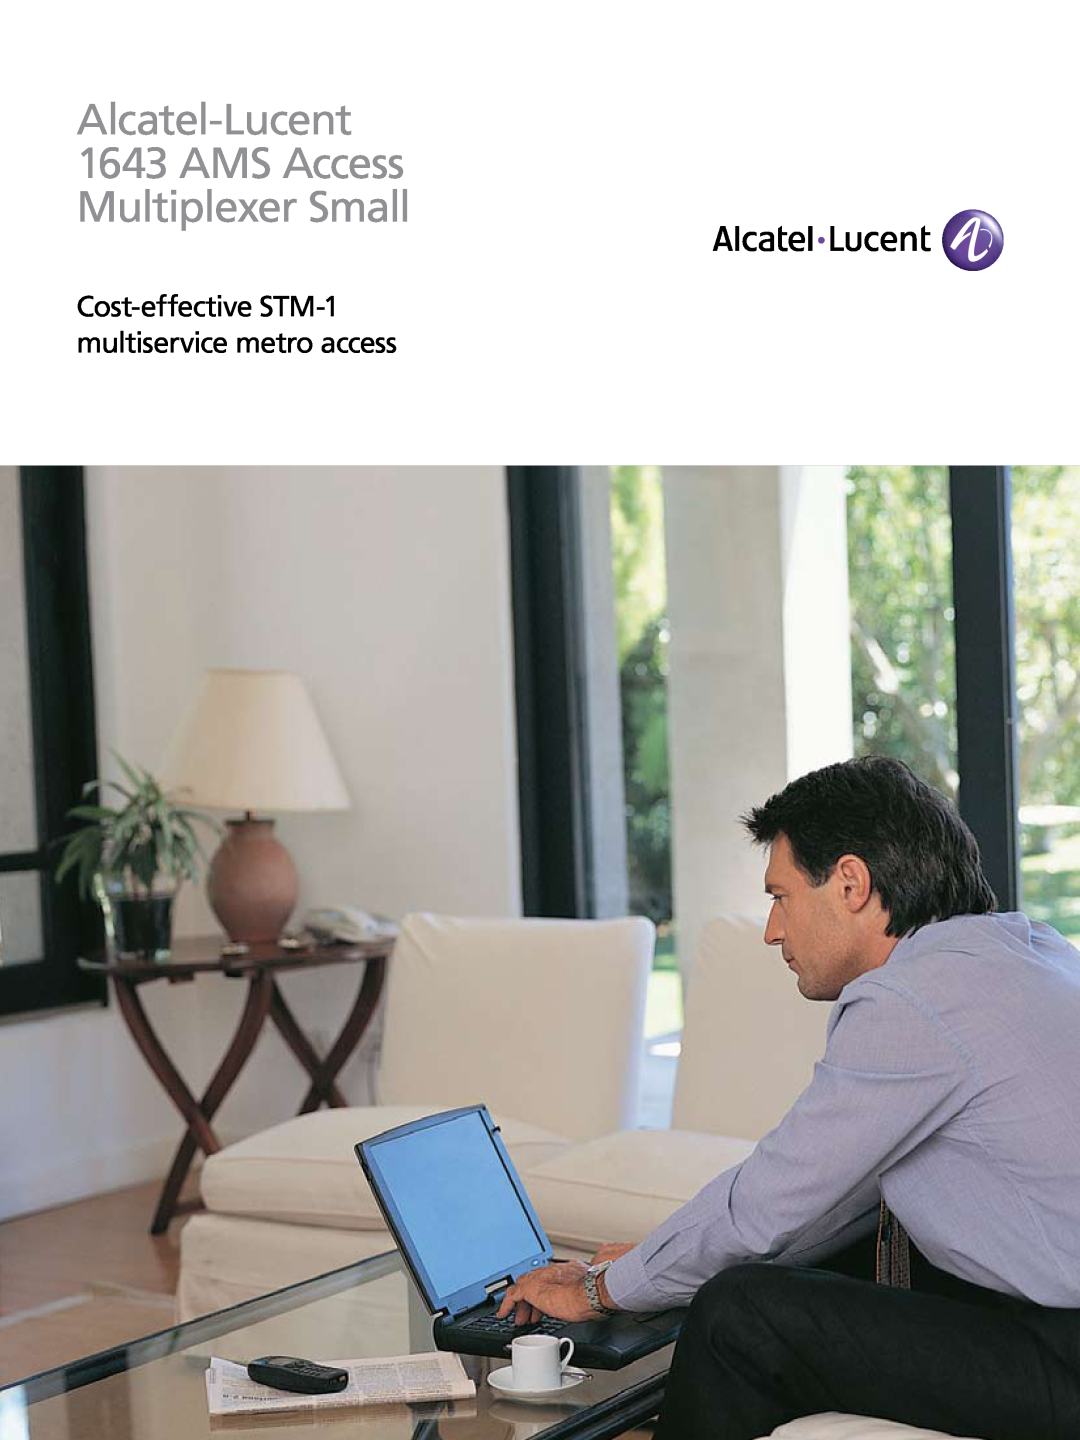 Alcatel-Lucent manual Alcatel-Lucent 1643 AMS Access Multiplexer Small, Cost-effective STM-1 multiservice metro access 